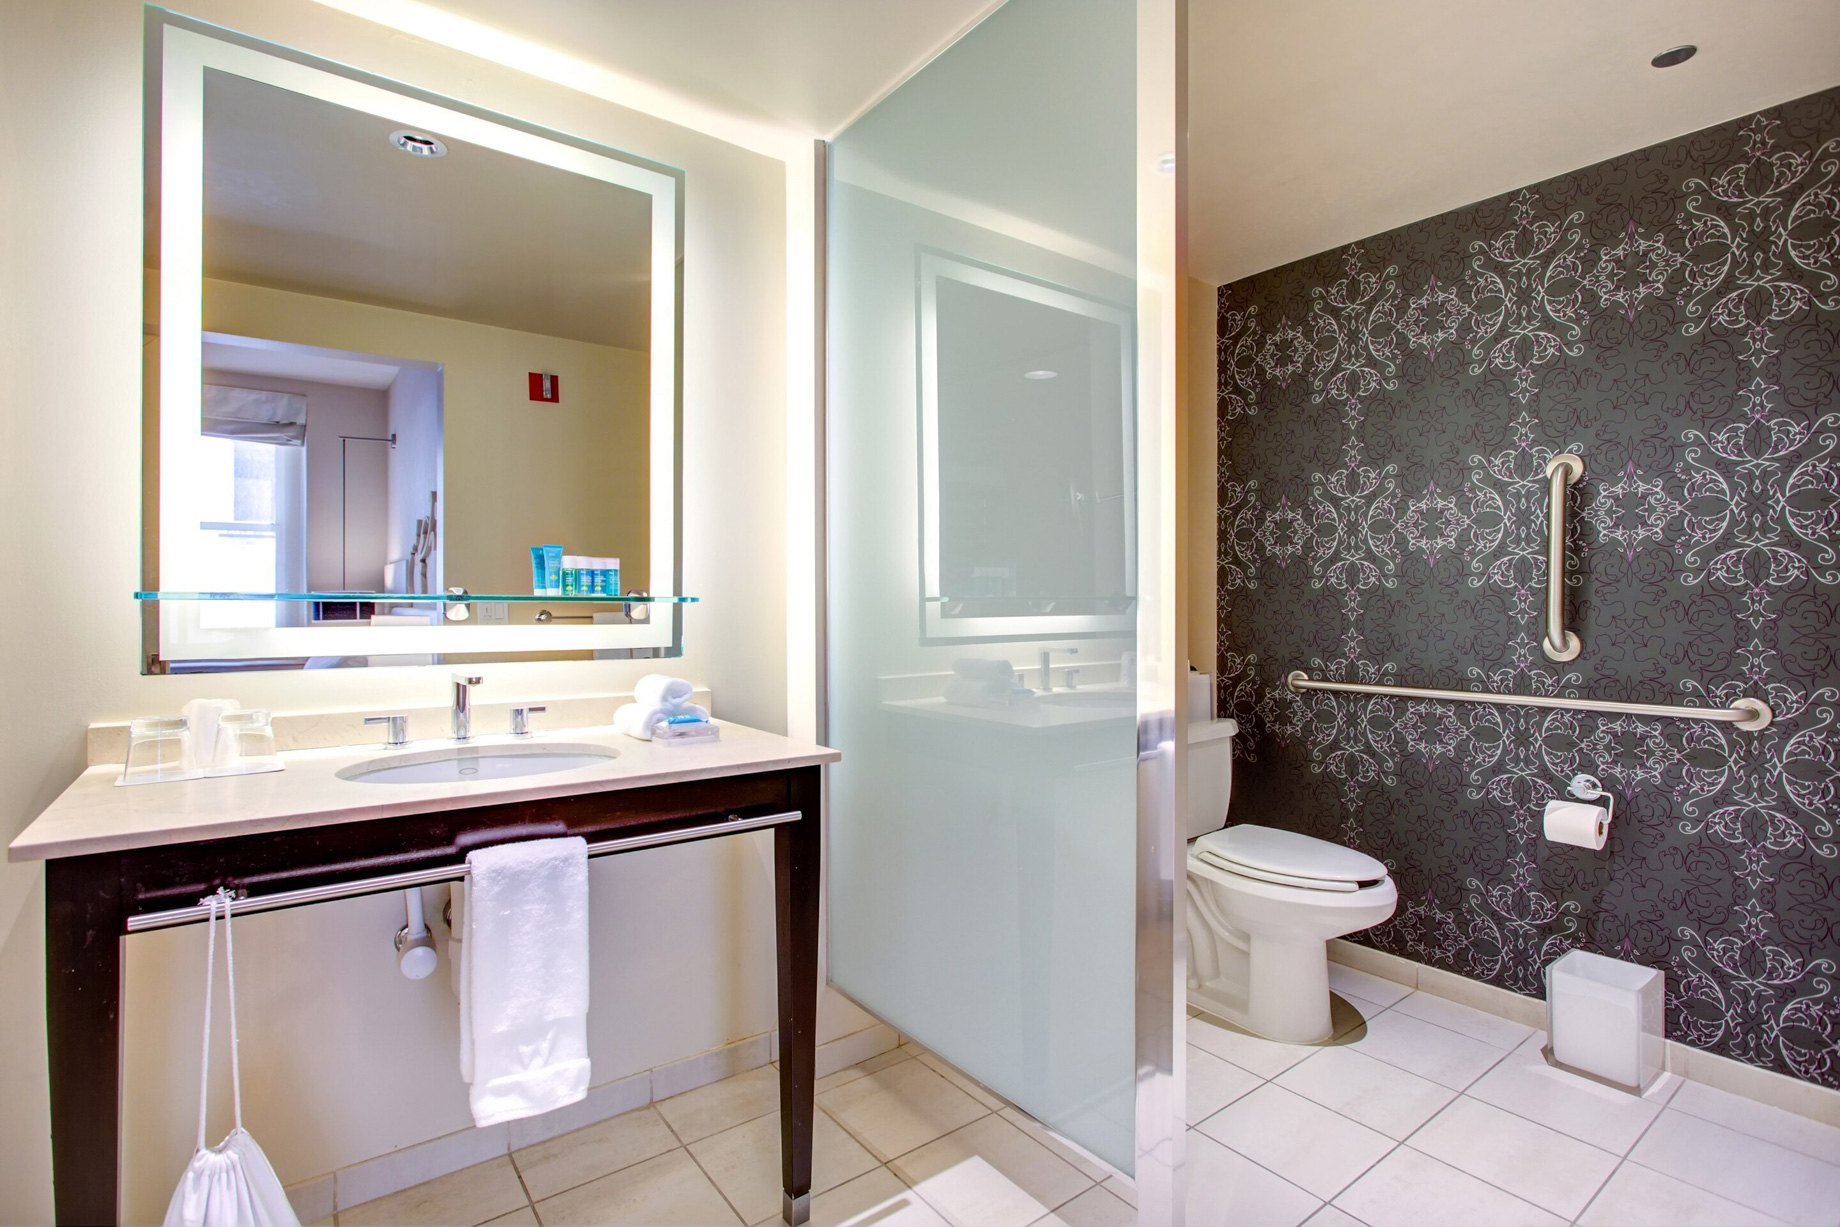 W Chicago City Center Hotel – Chicago, IL, USA – Fabulous Guest Bathroom